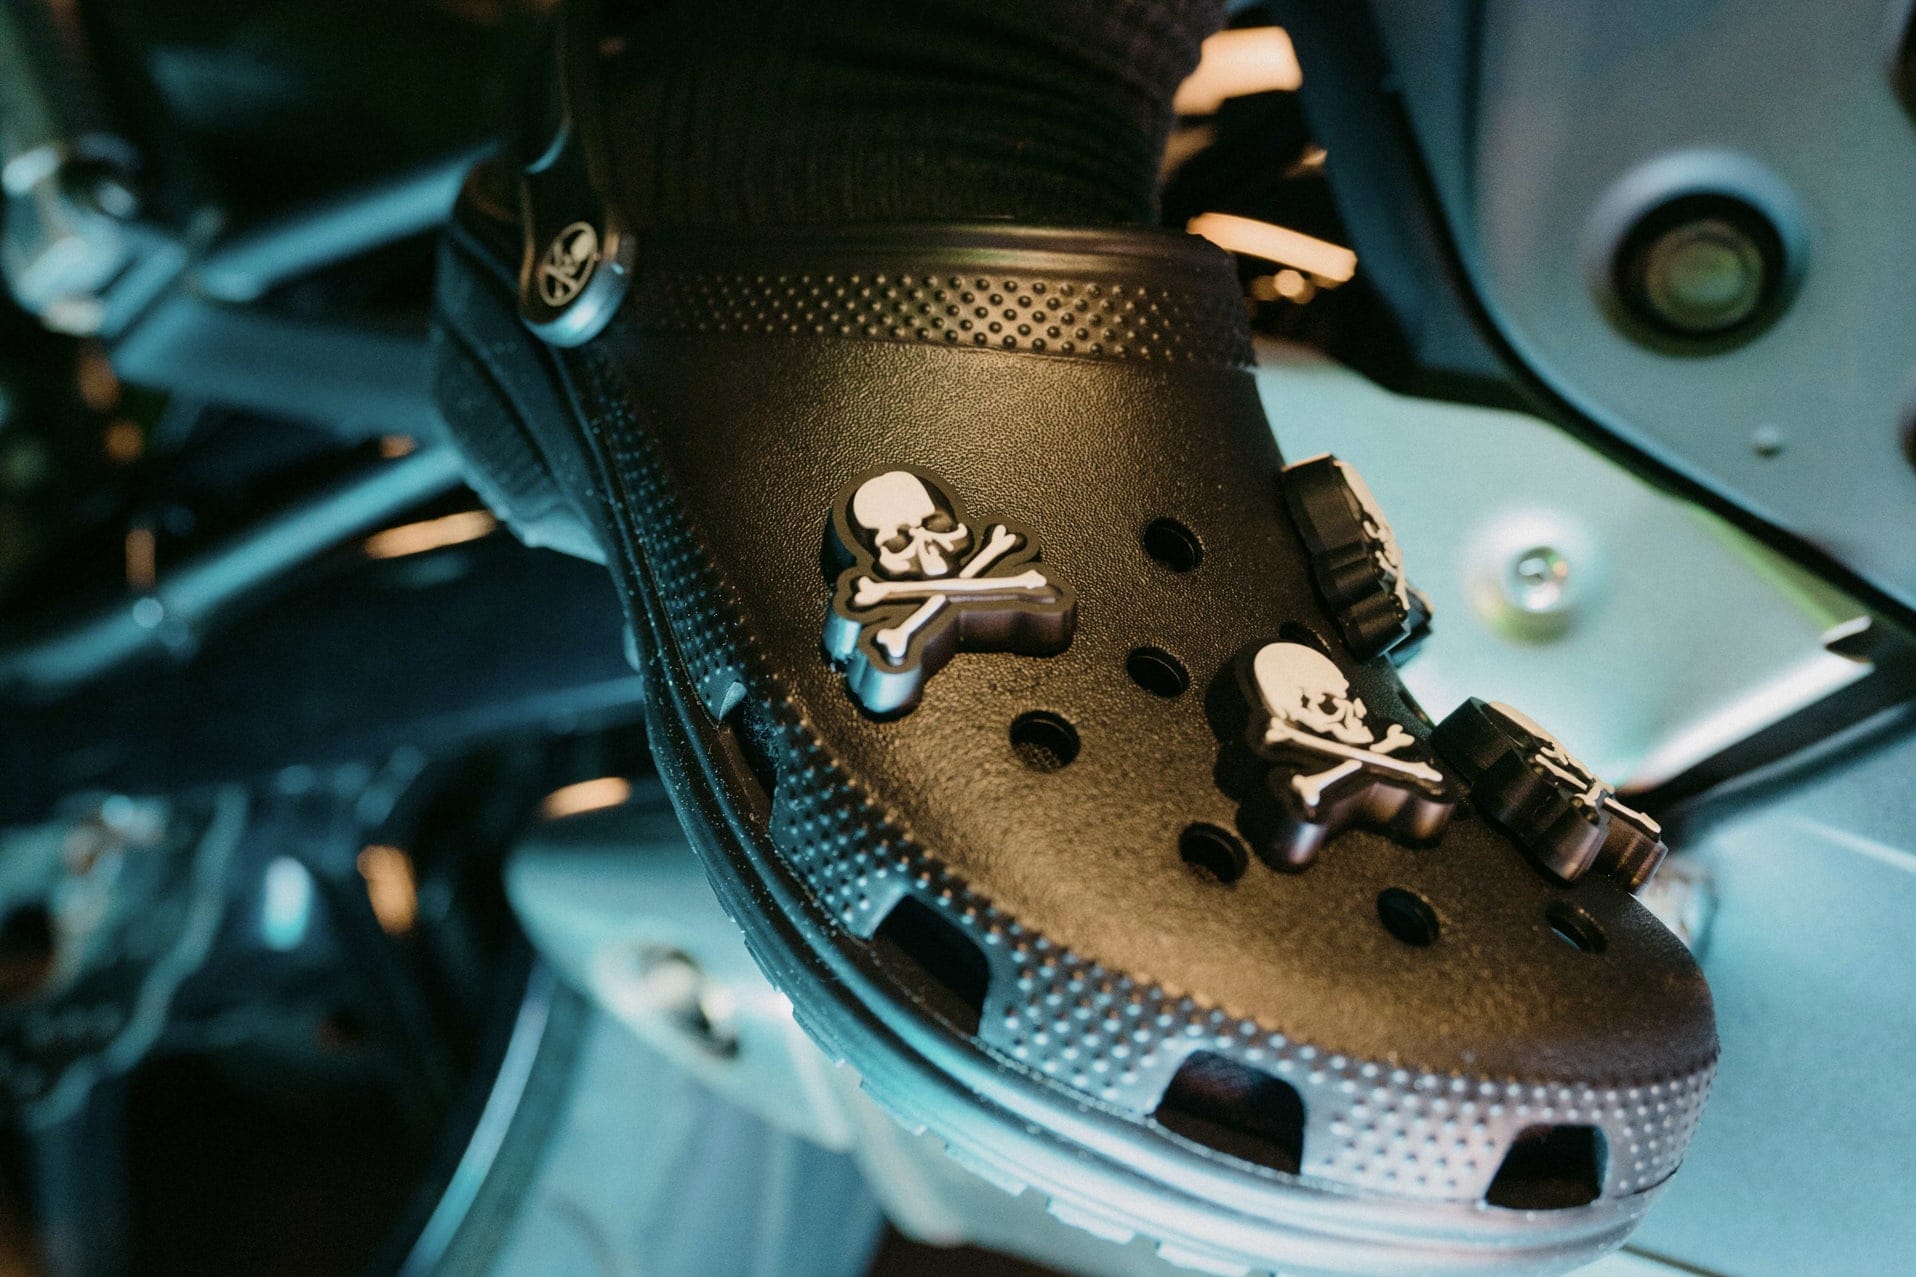 Mastermind Japan and Crocs Link for Cyberpunk Clogs | Hypebeast